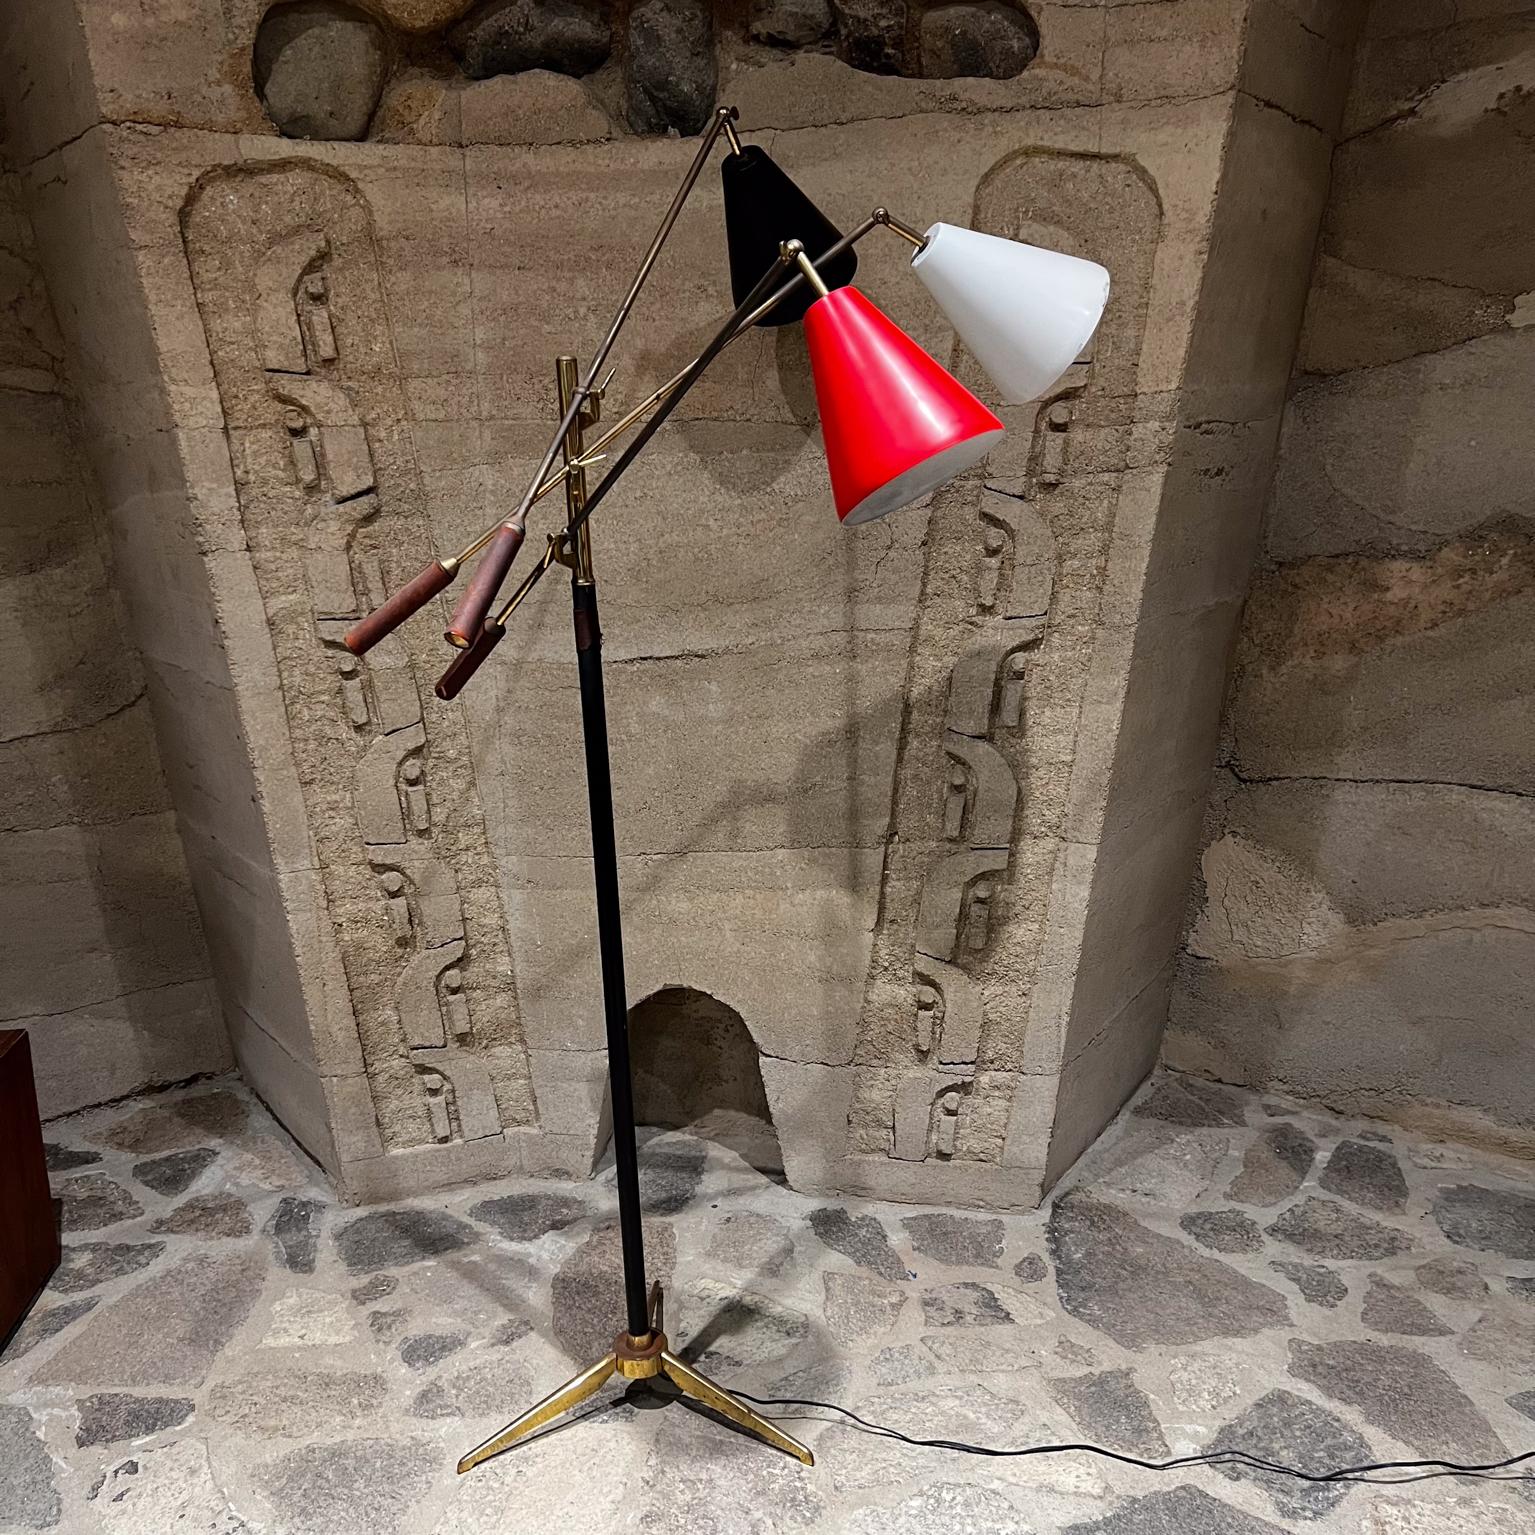 1958 Style Arredoluce early Triennale lamp Italy
Brass with original brown leather.
Shade is black, red and white.
Stamped on top made in Italy.
68.5 h x 32.5 w x 36 d
Expect unrestored original vintage condition. Leather with vintage wear. Brass